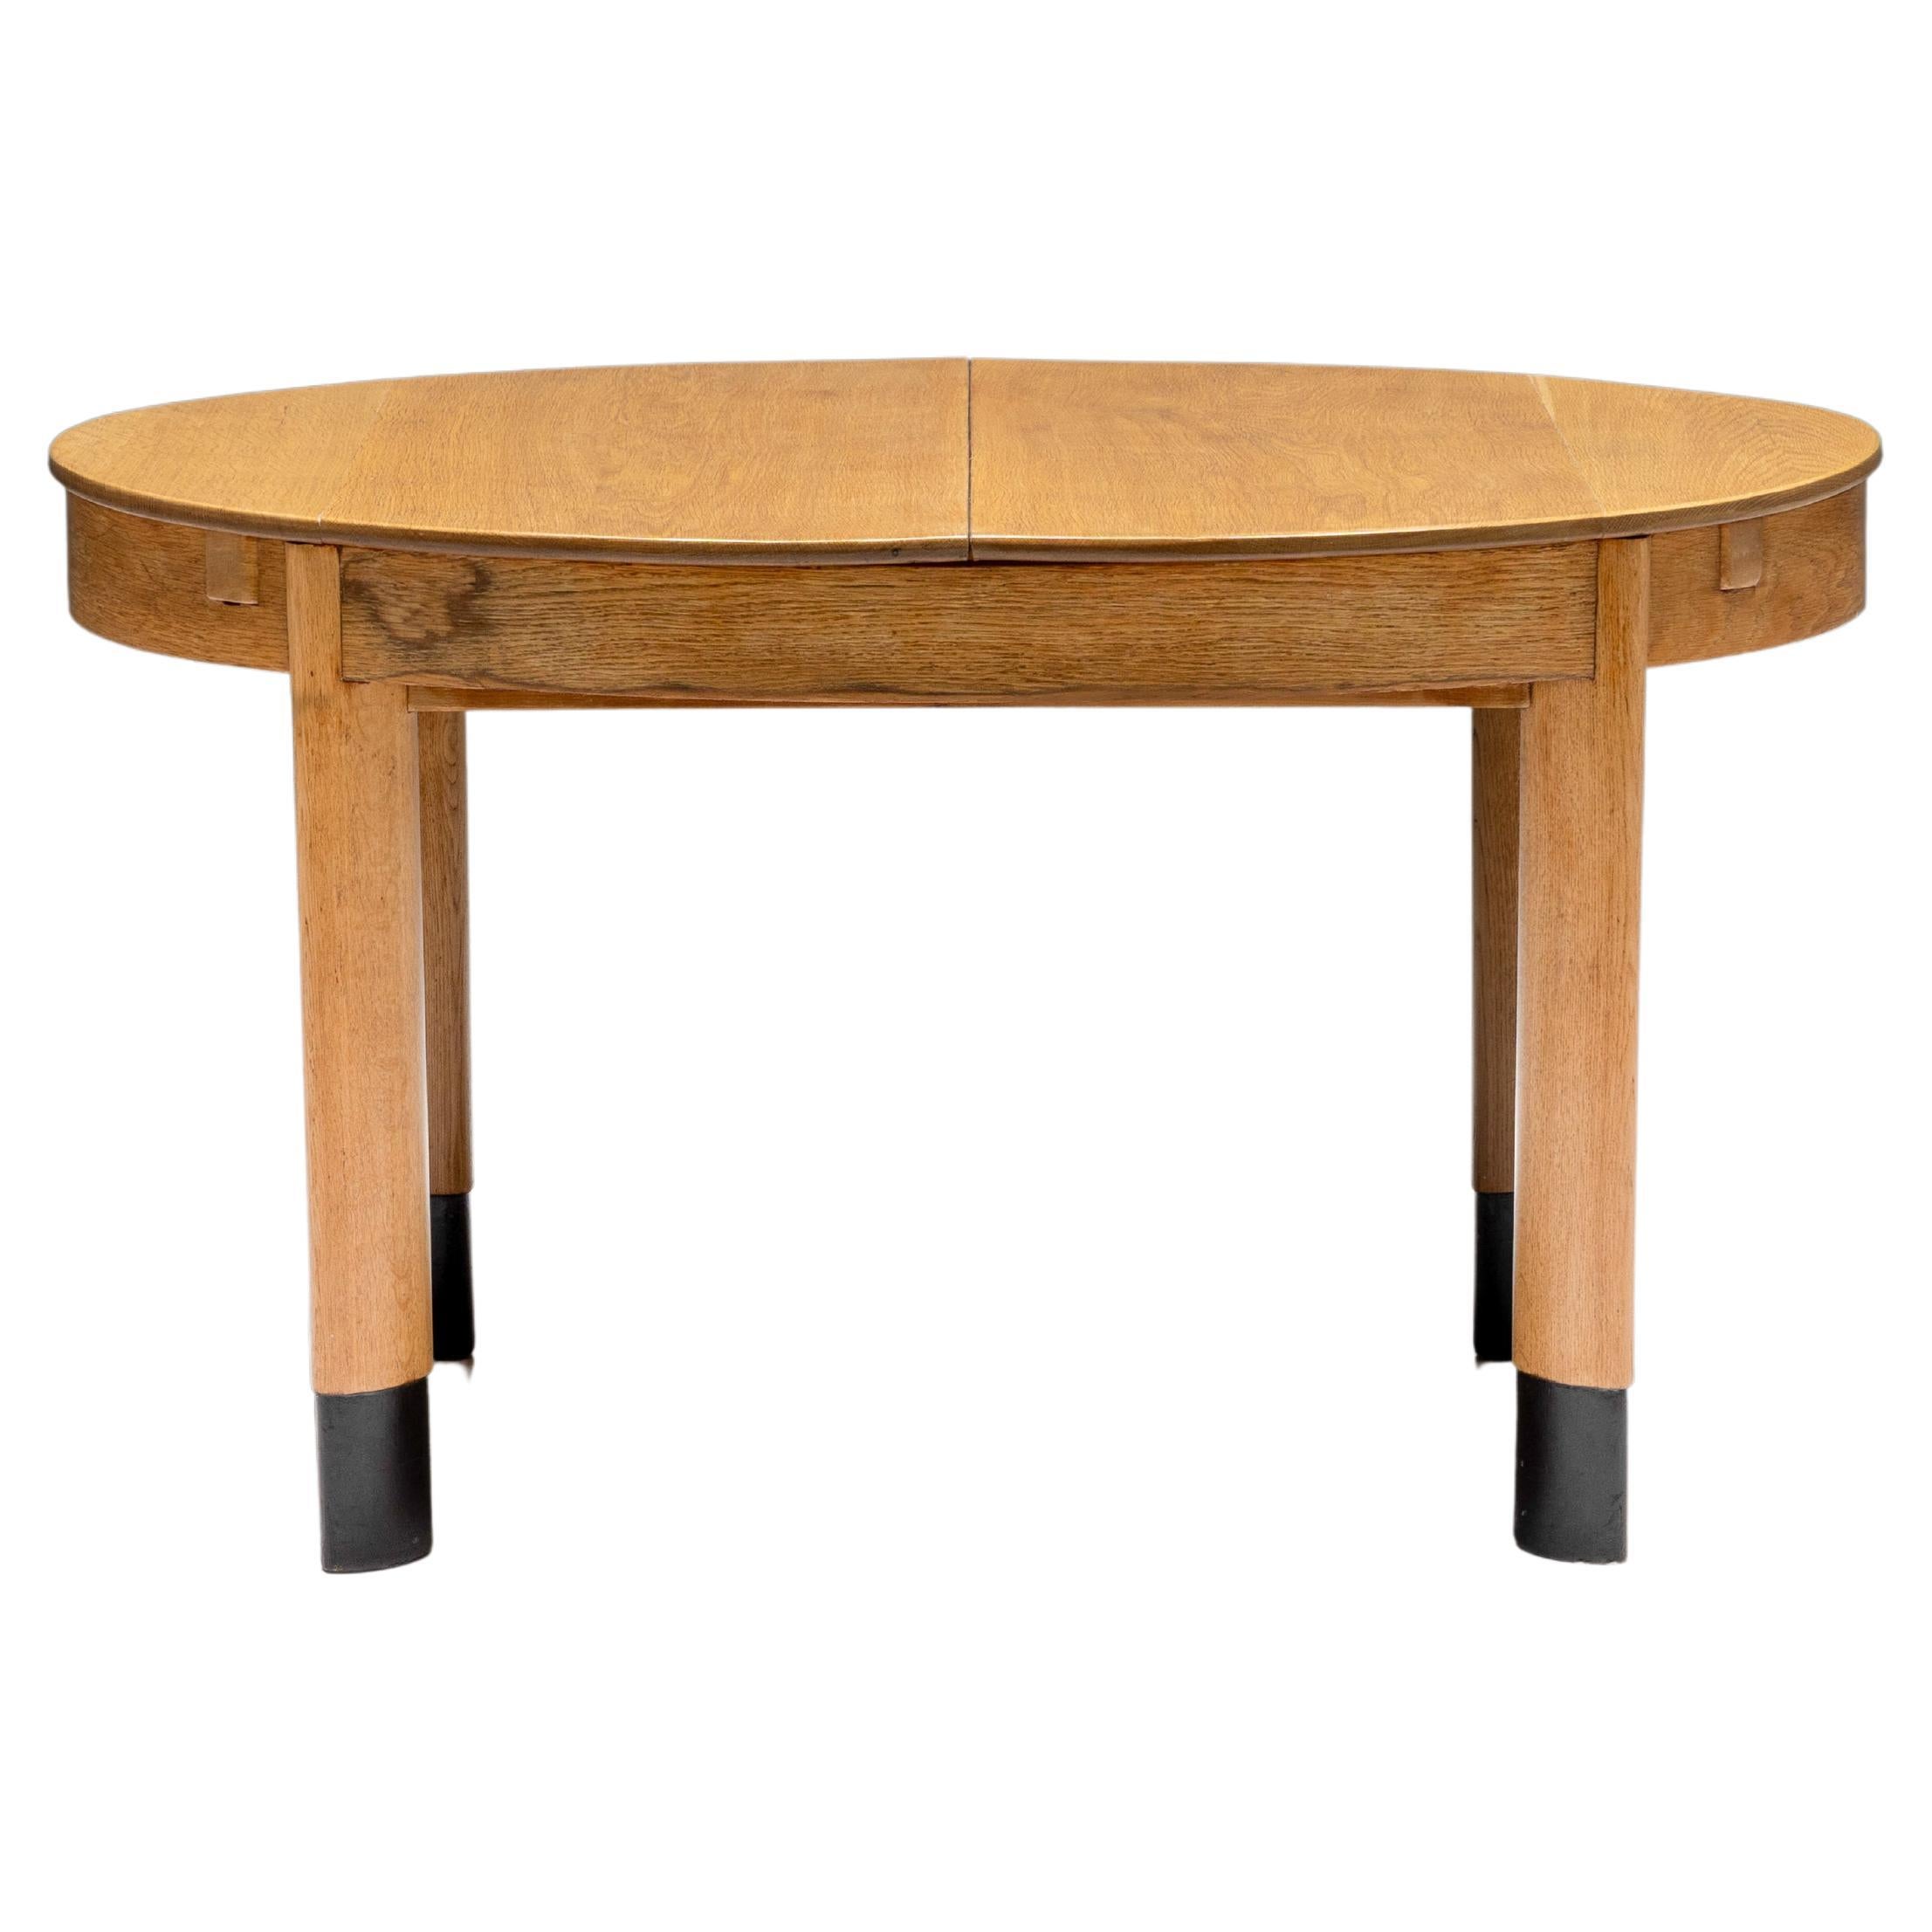 Rationalist Oval Dining Table in Oak, Holland, 1920s For Sale